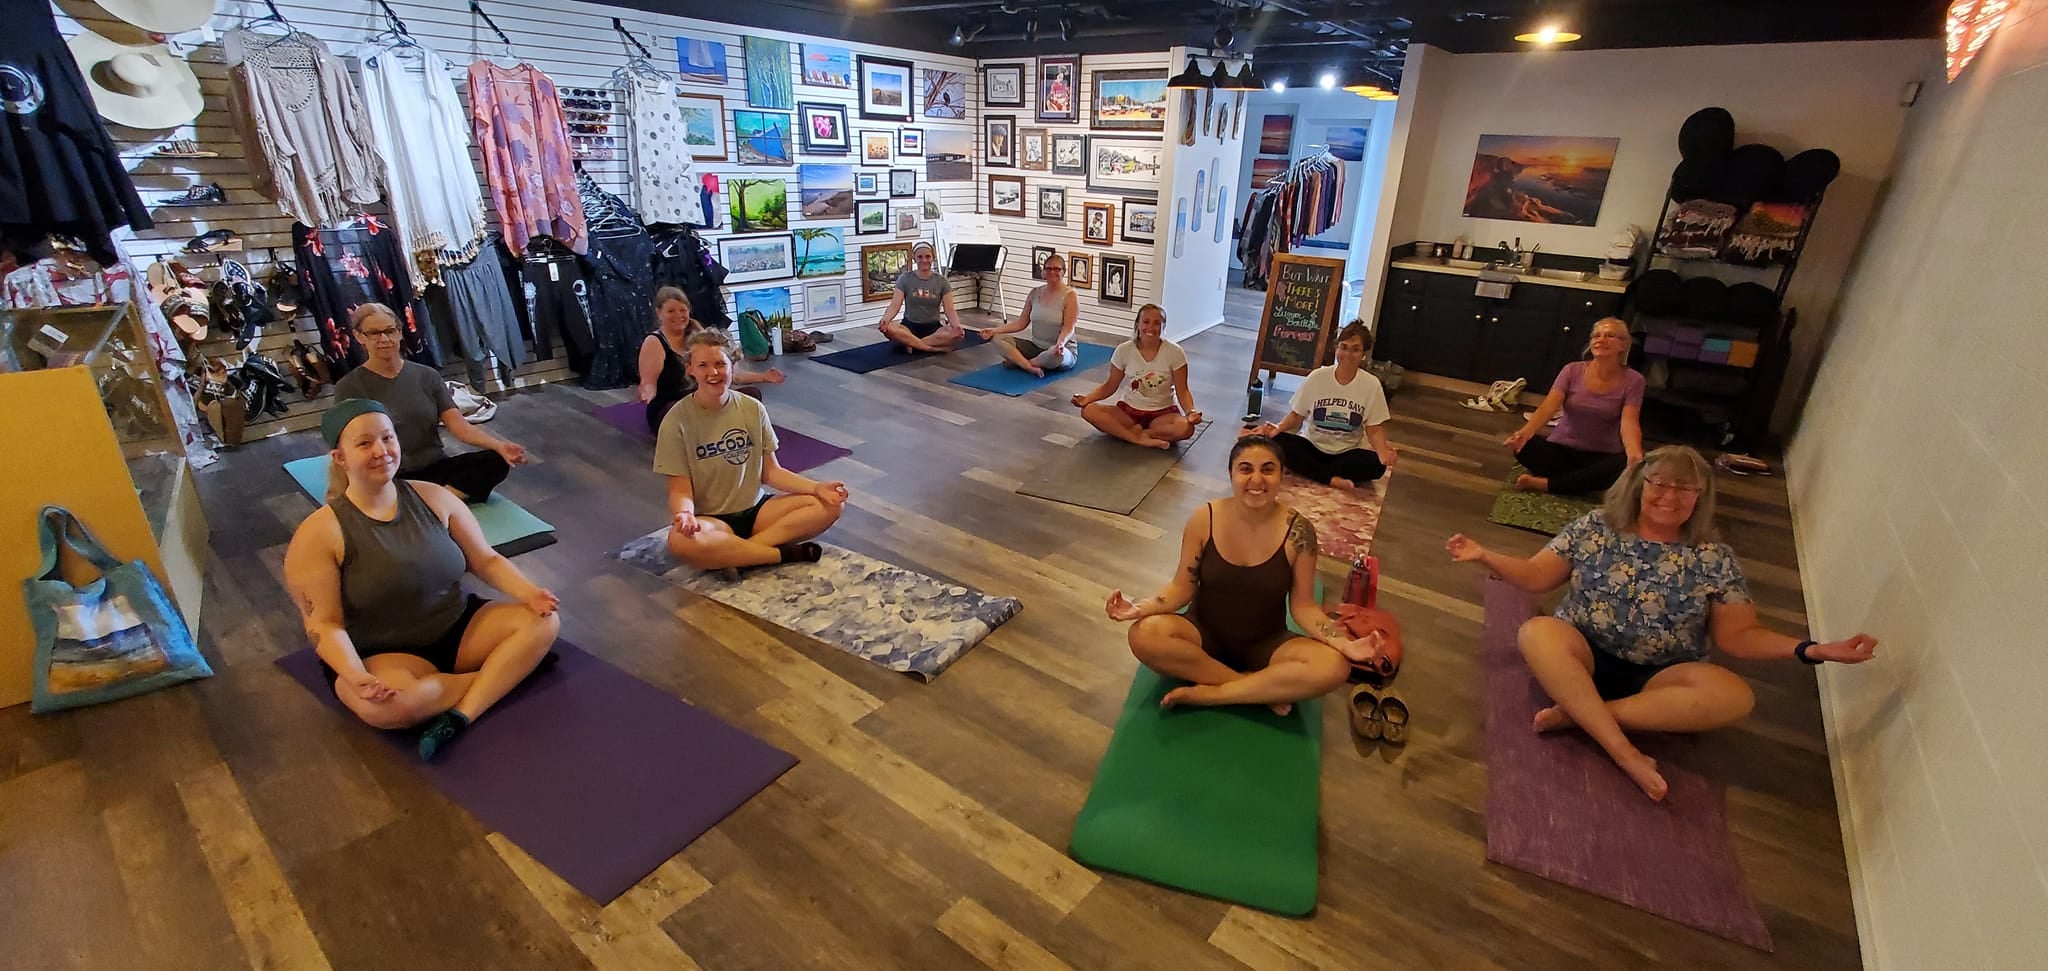 One of Lululemon's in-store yoga classes